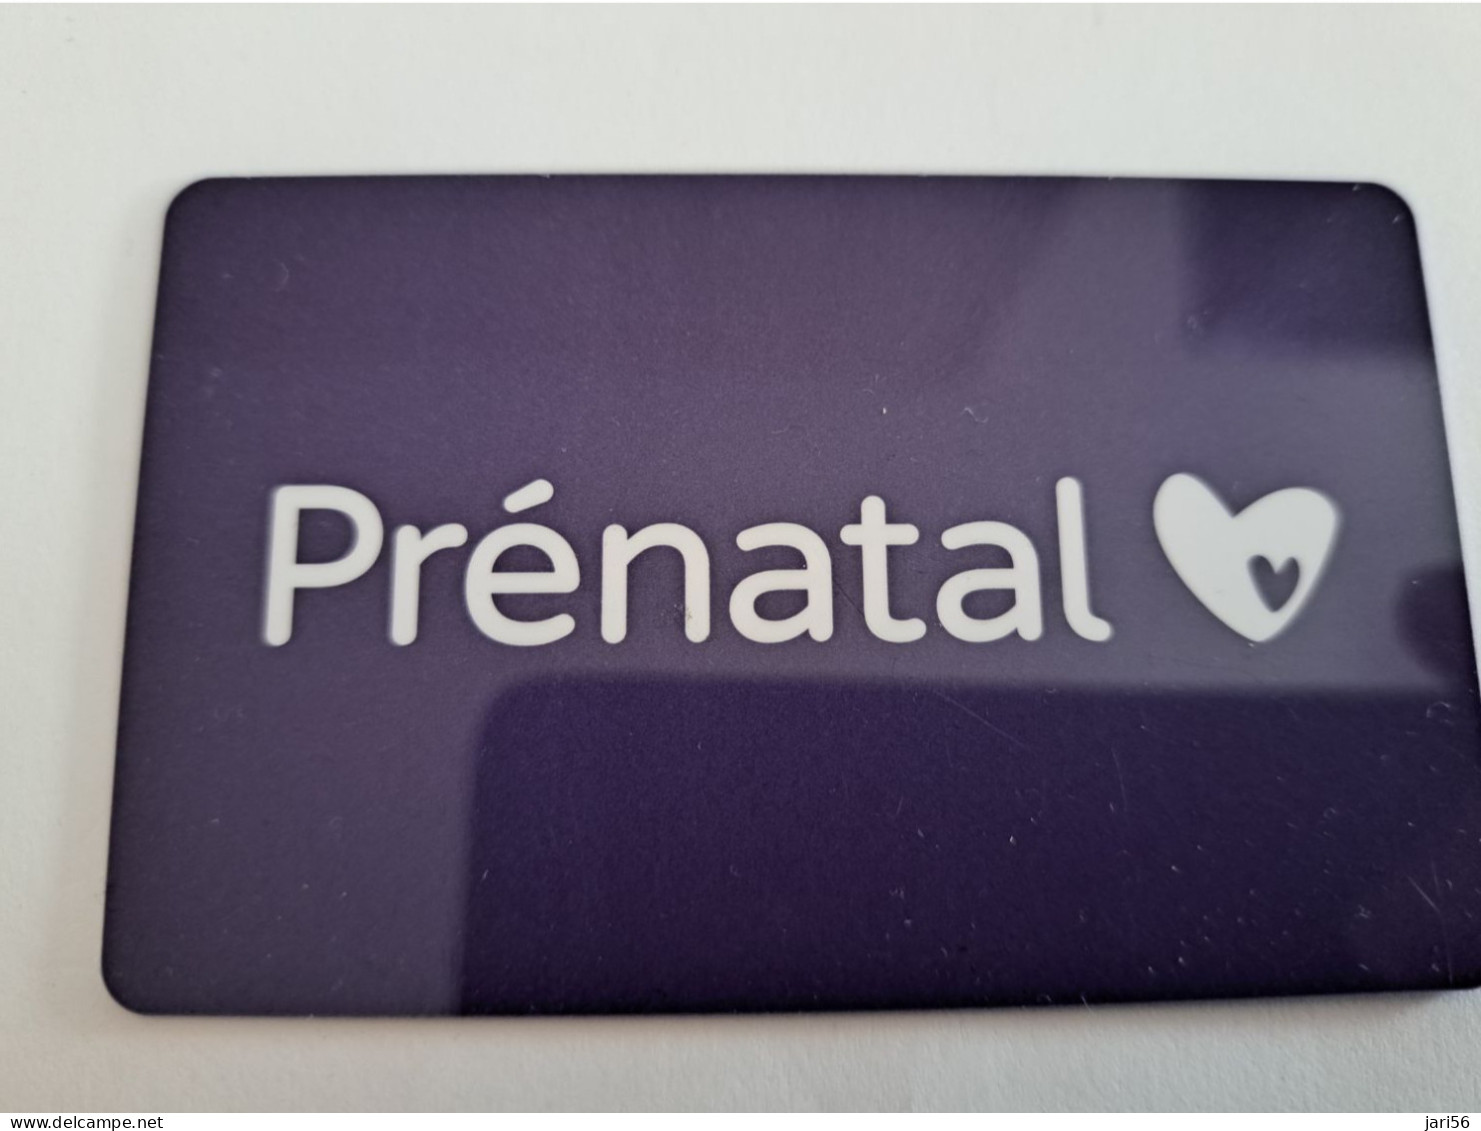 CADEAU   GIFT CARD  /   PRENATAL   CARD    /   / NOT LOADED/  MINT CARD     ** 16691 ** - Gift Cards